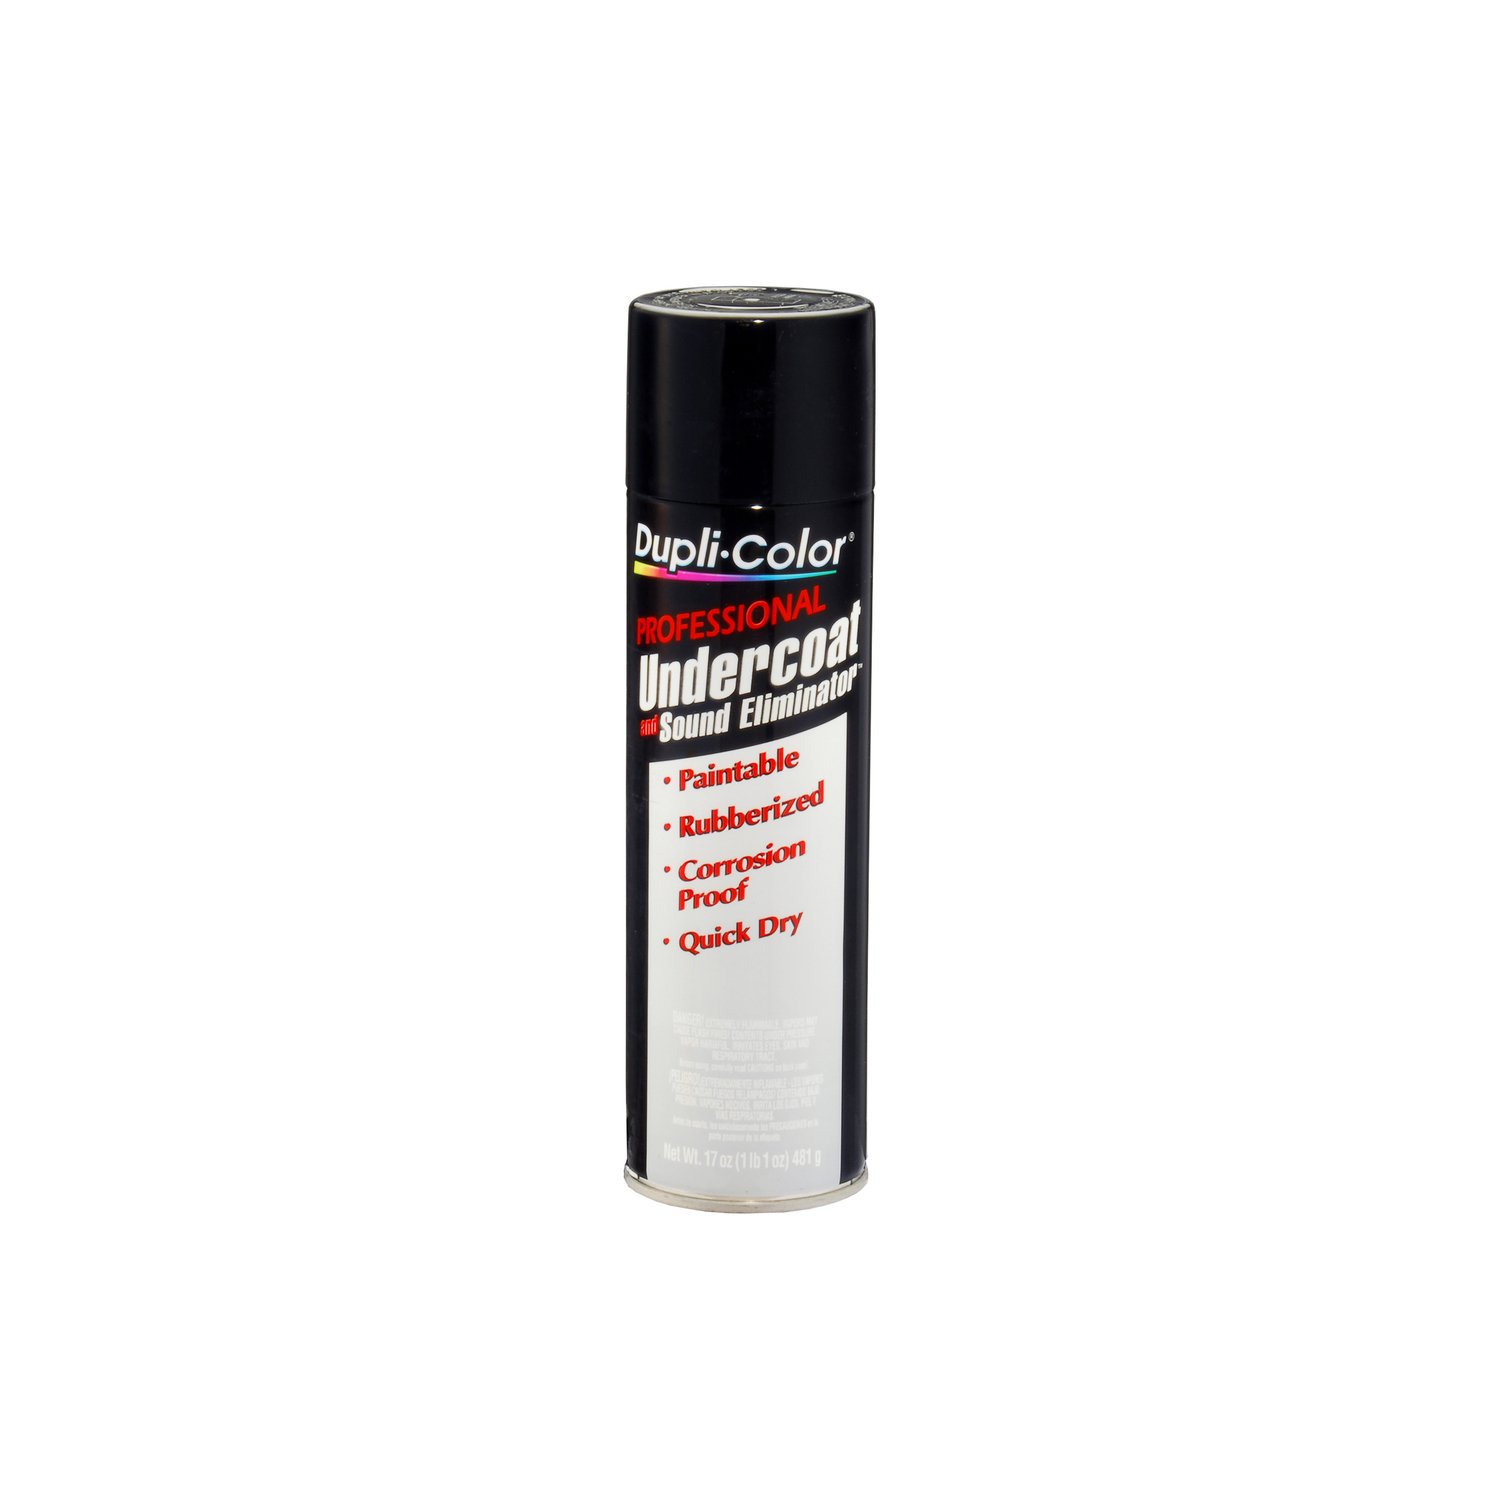 Professional Undercoat with Sound Eliminator 17oz. Can